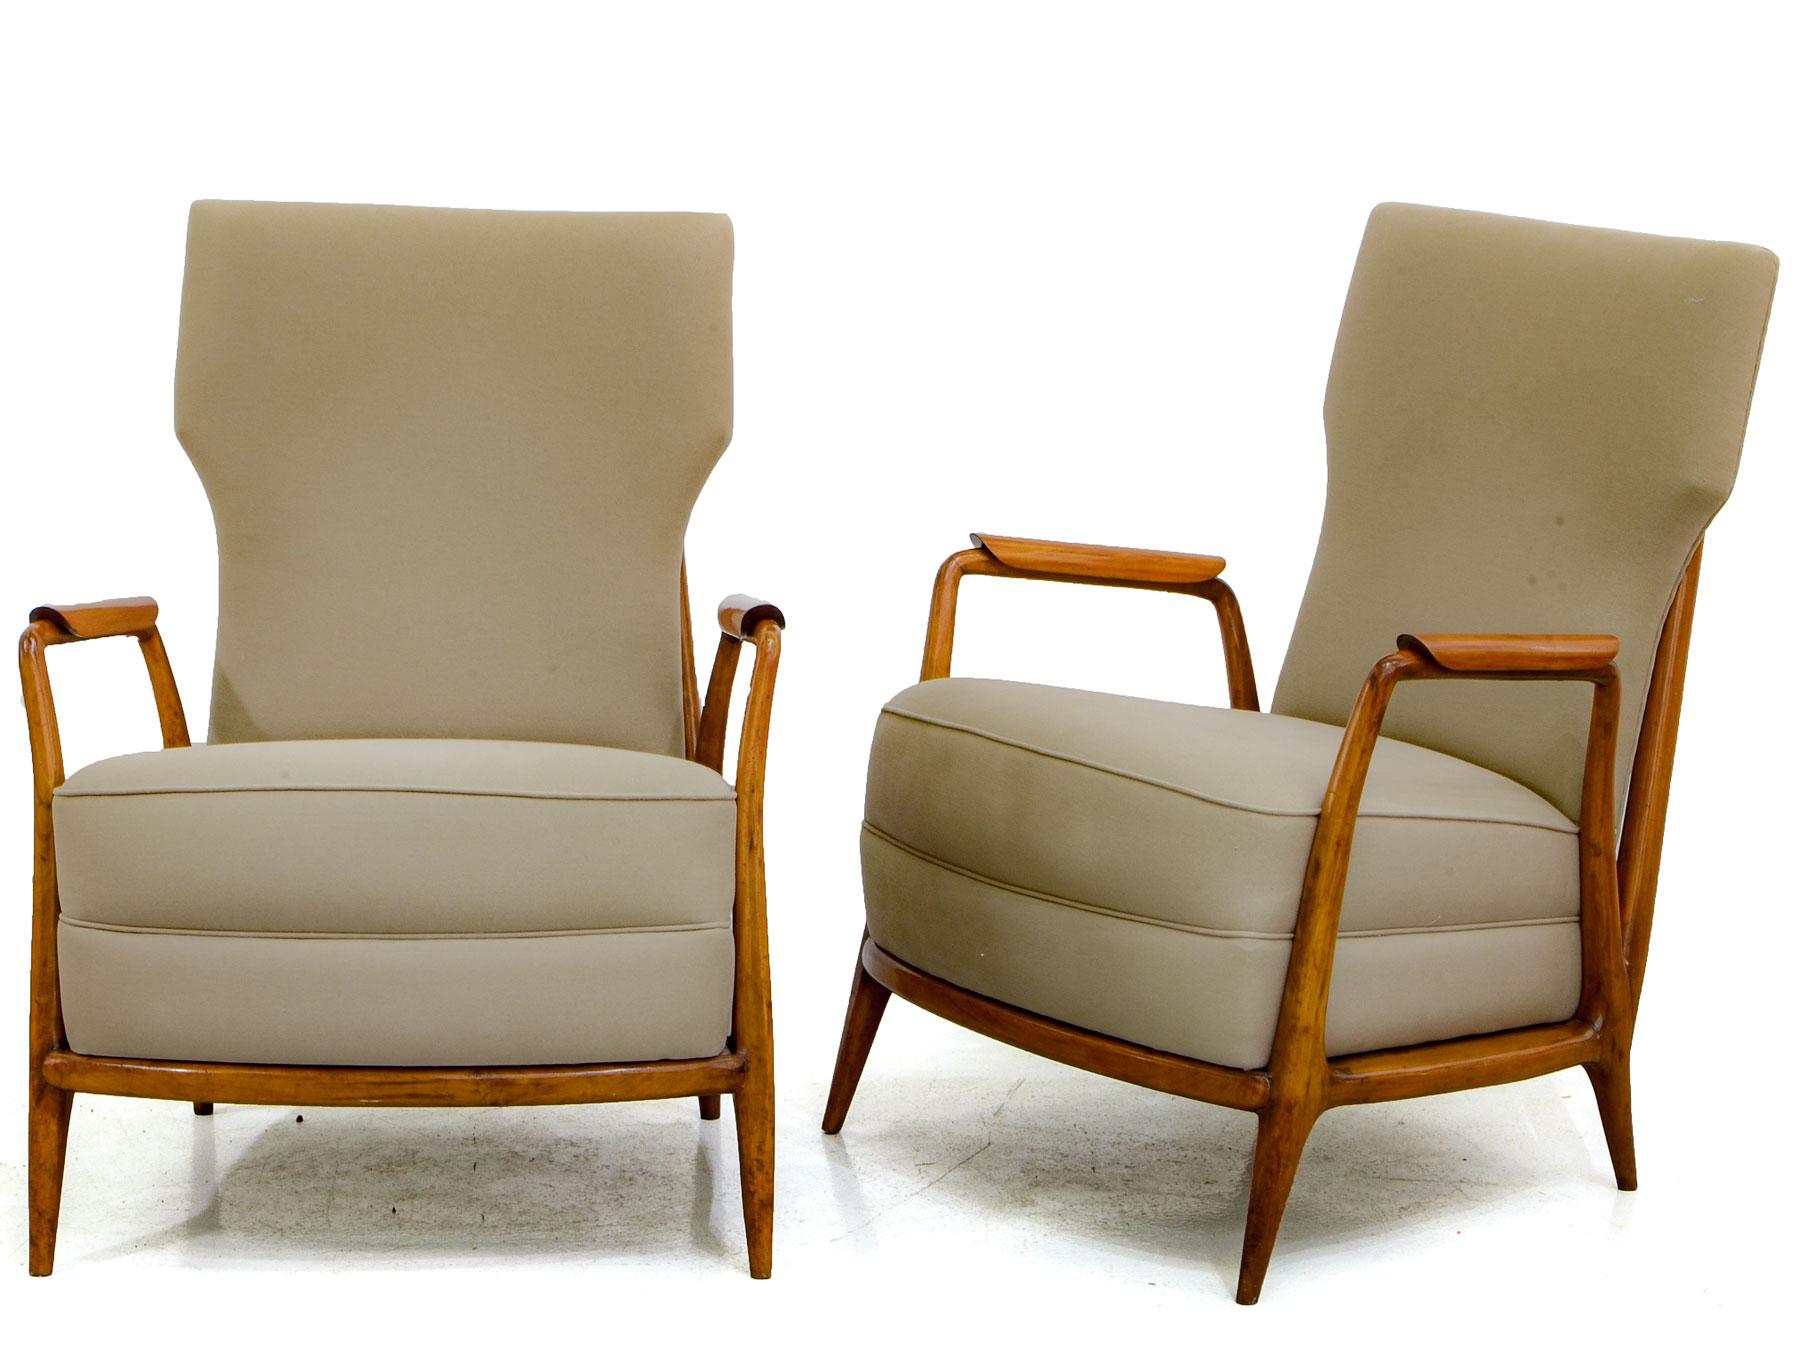 Brazilian Pair of Armchairs in Tropical Wood, by Giuseppe Scapinelly, Mid-Century Modern